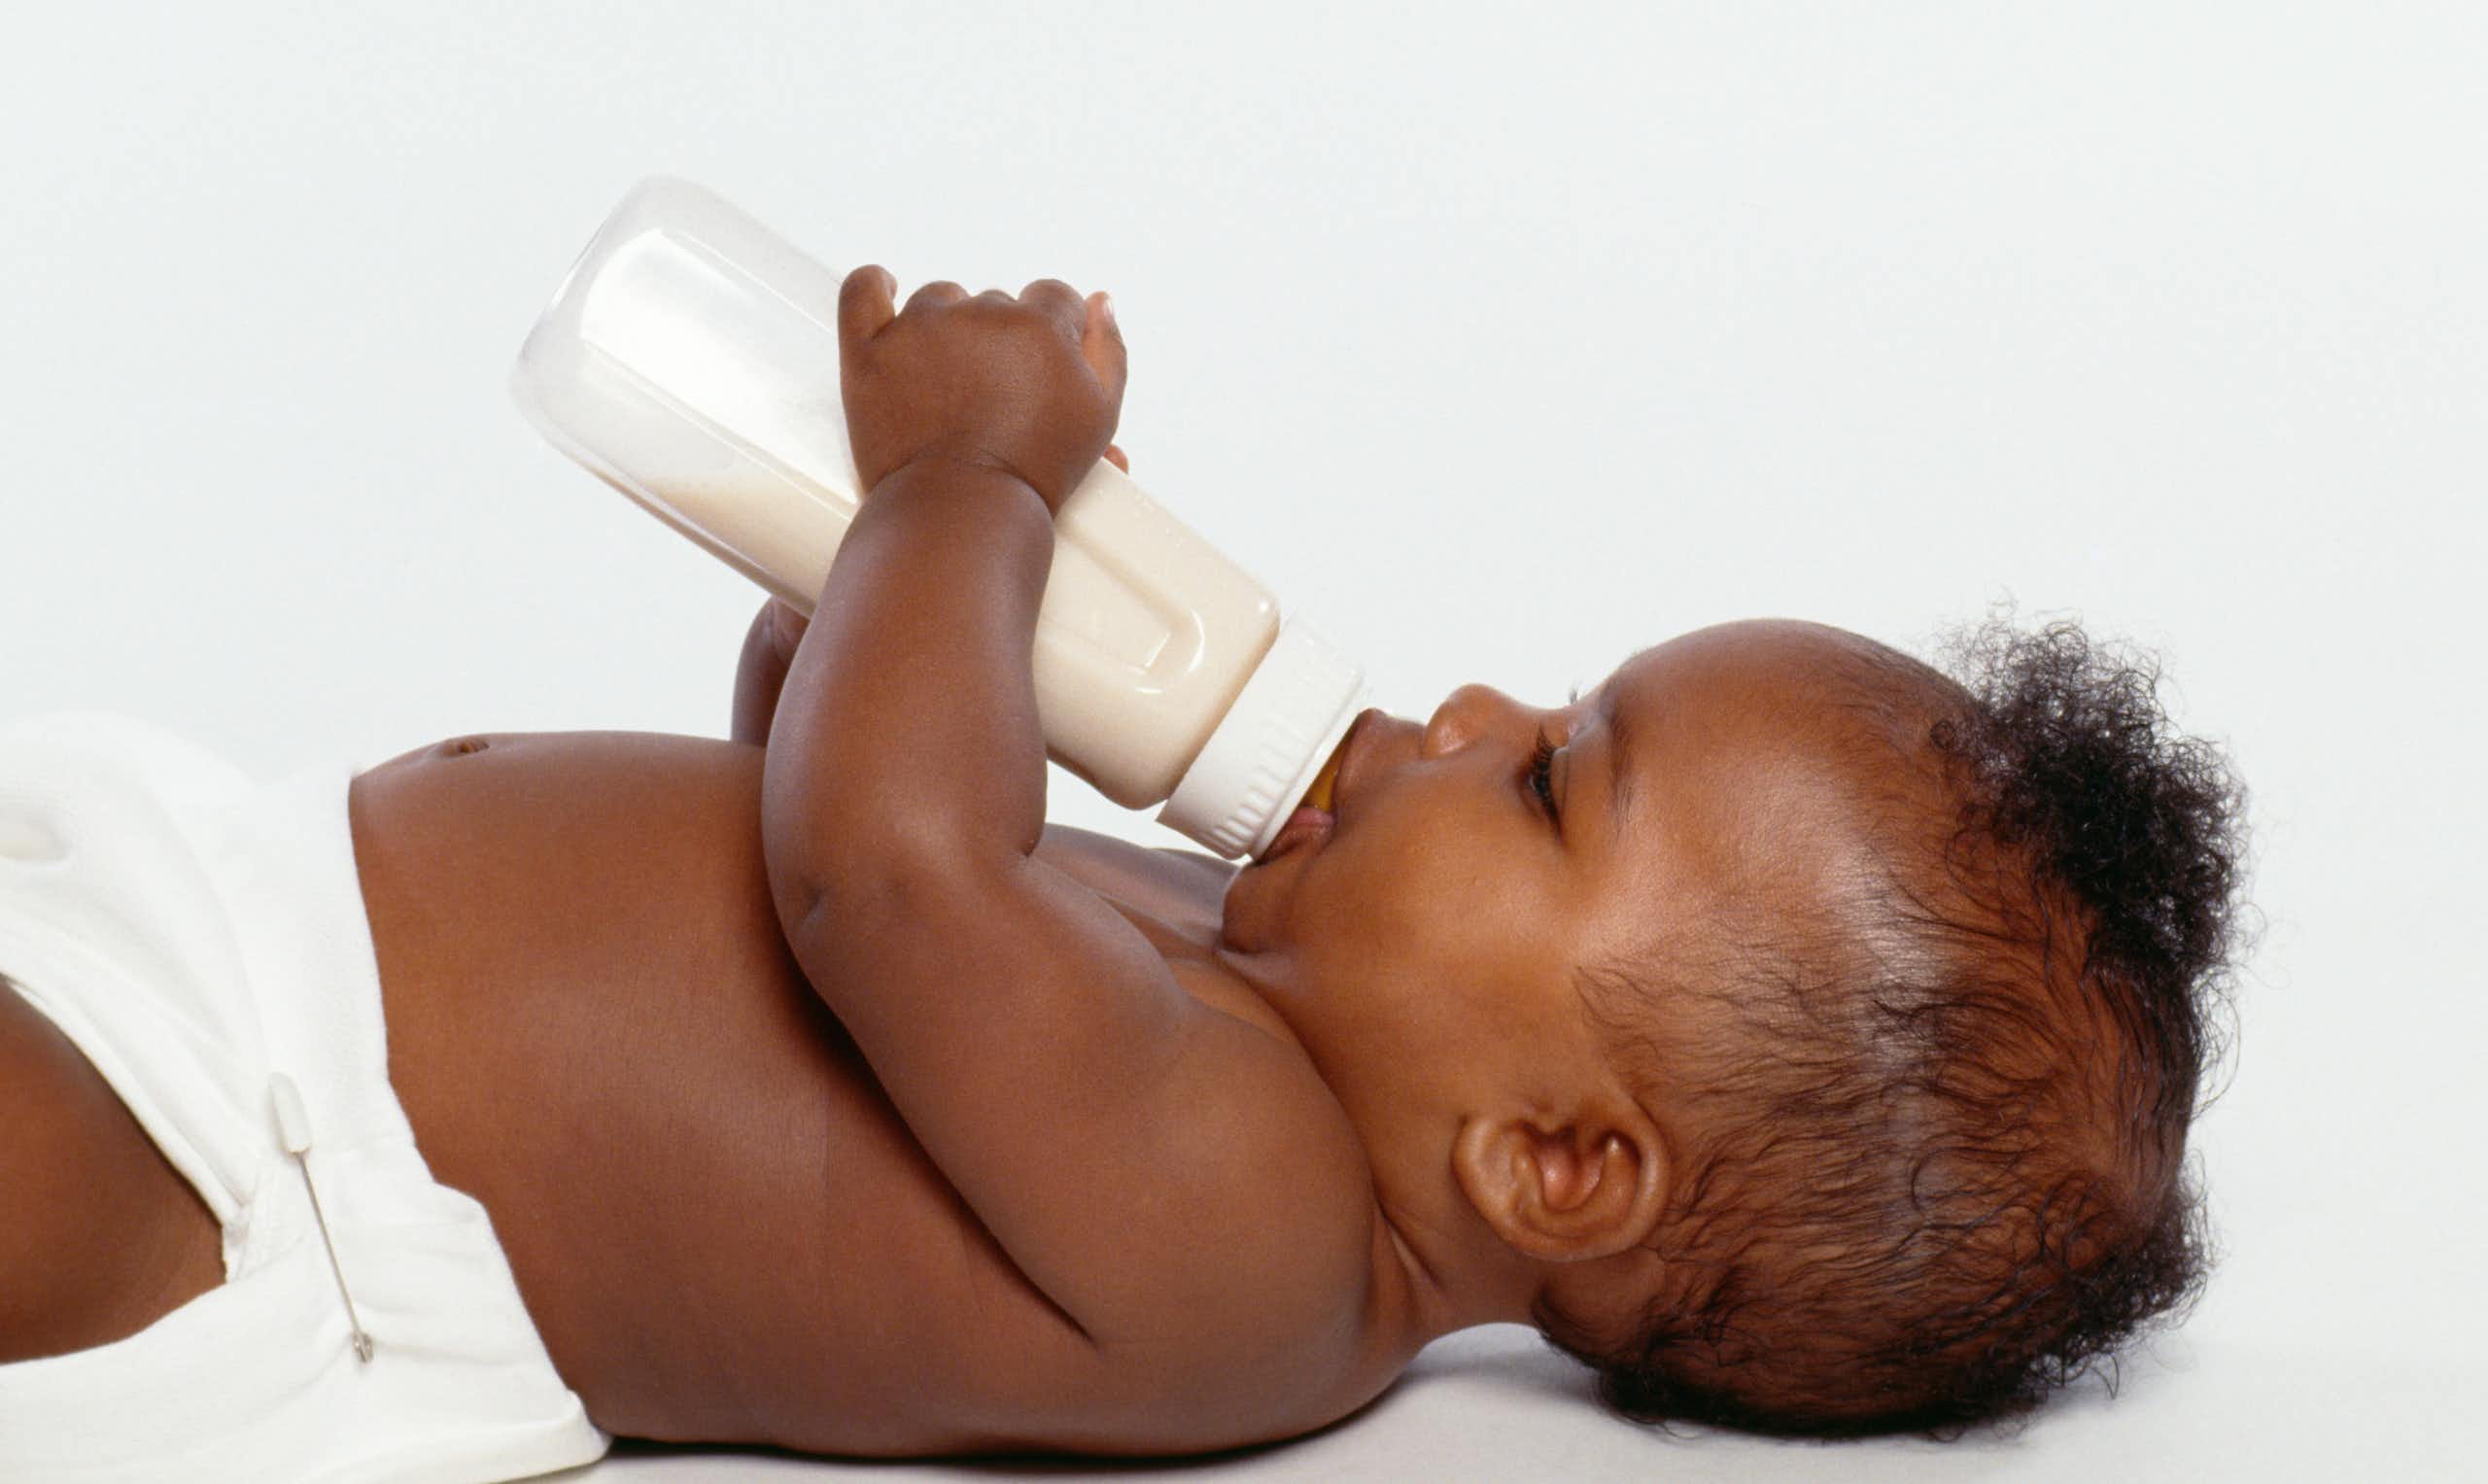 Sugar in baby food: why Nestlé needs to be held to account in Africa